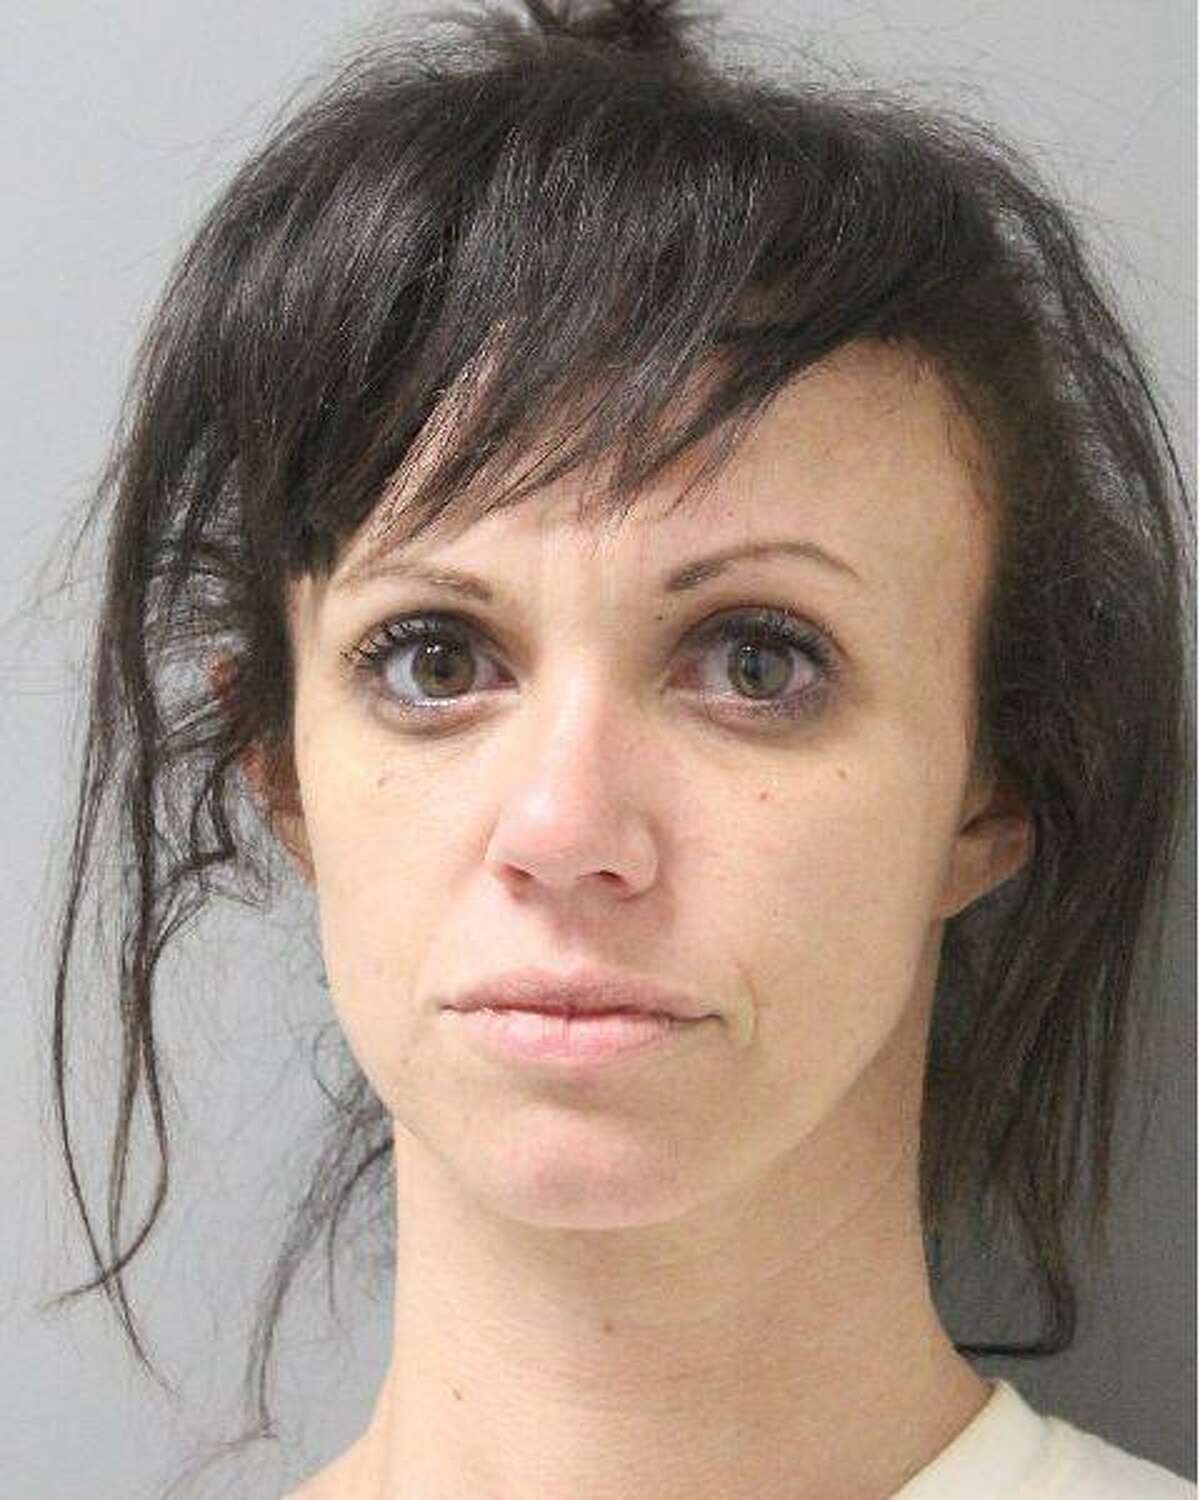 Former Playboy playmate busted on meth charges in Louisiana